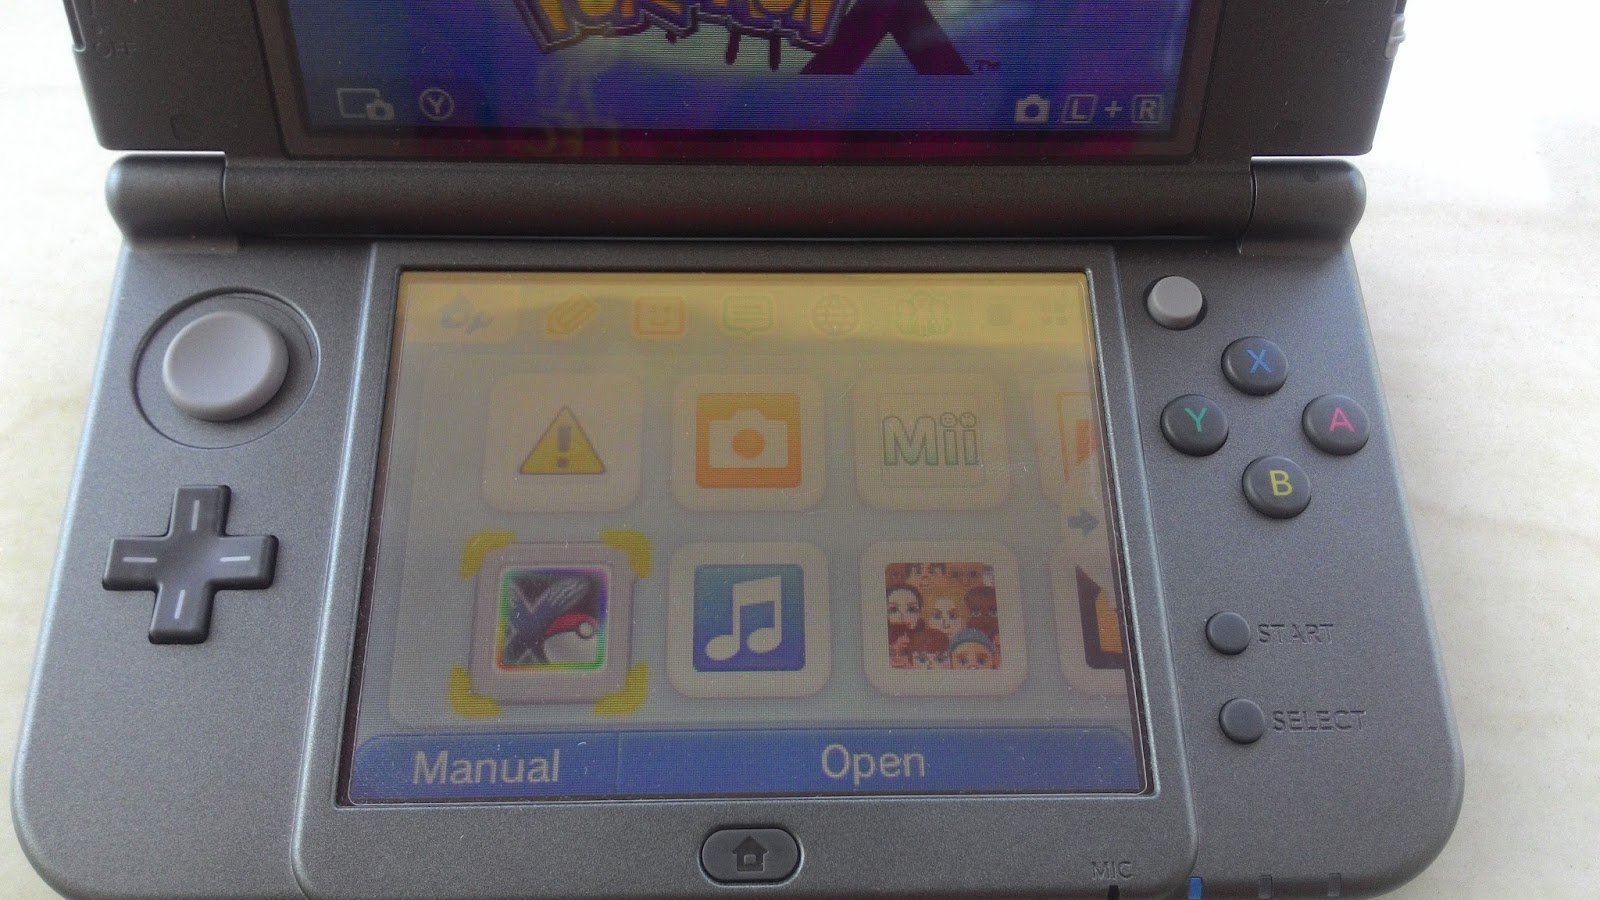 where to buy new nintendo 3ds xl